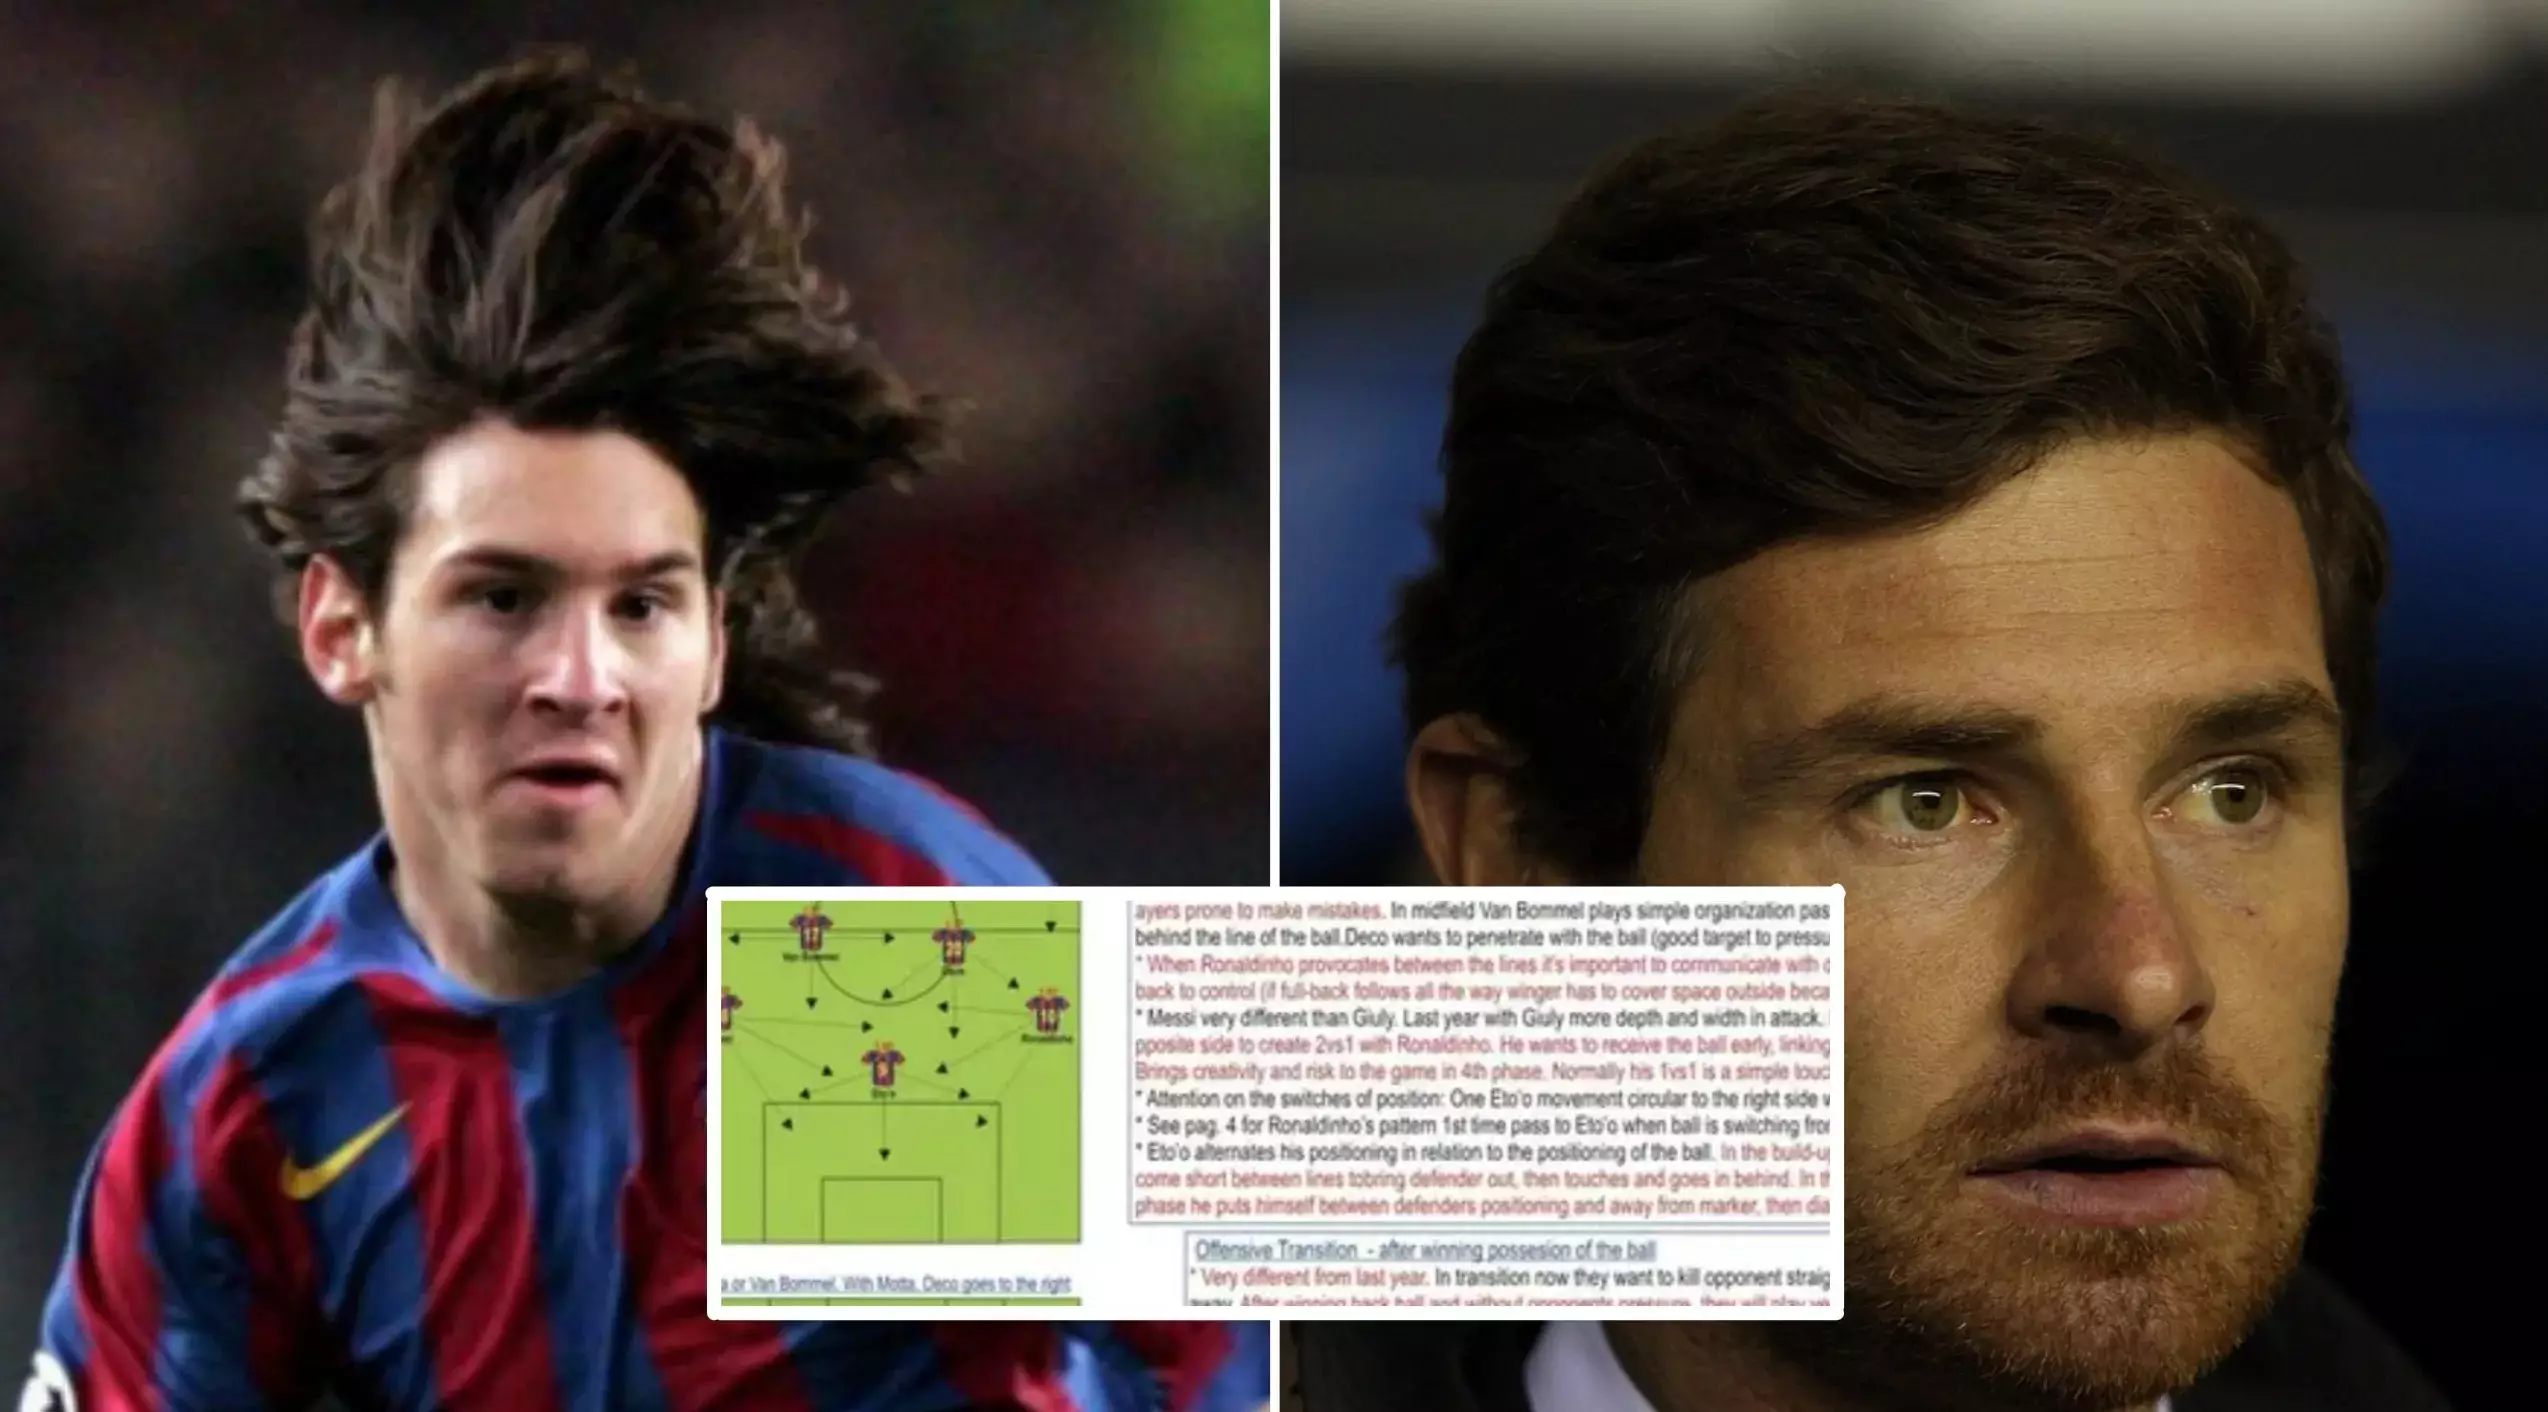 André Villas-Boas' Scout Report On 18-Year-Old Lionel Messi Surfaces, Reveals Extra Precautions Taken To Stop Him